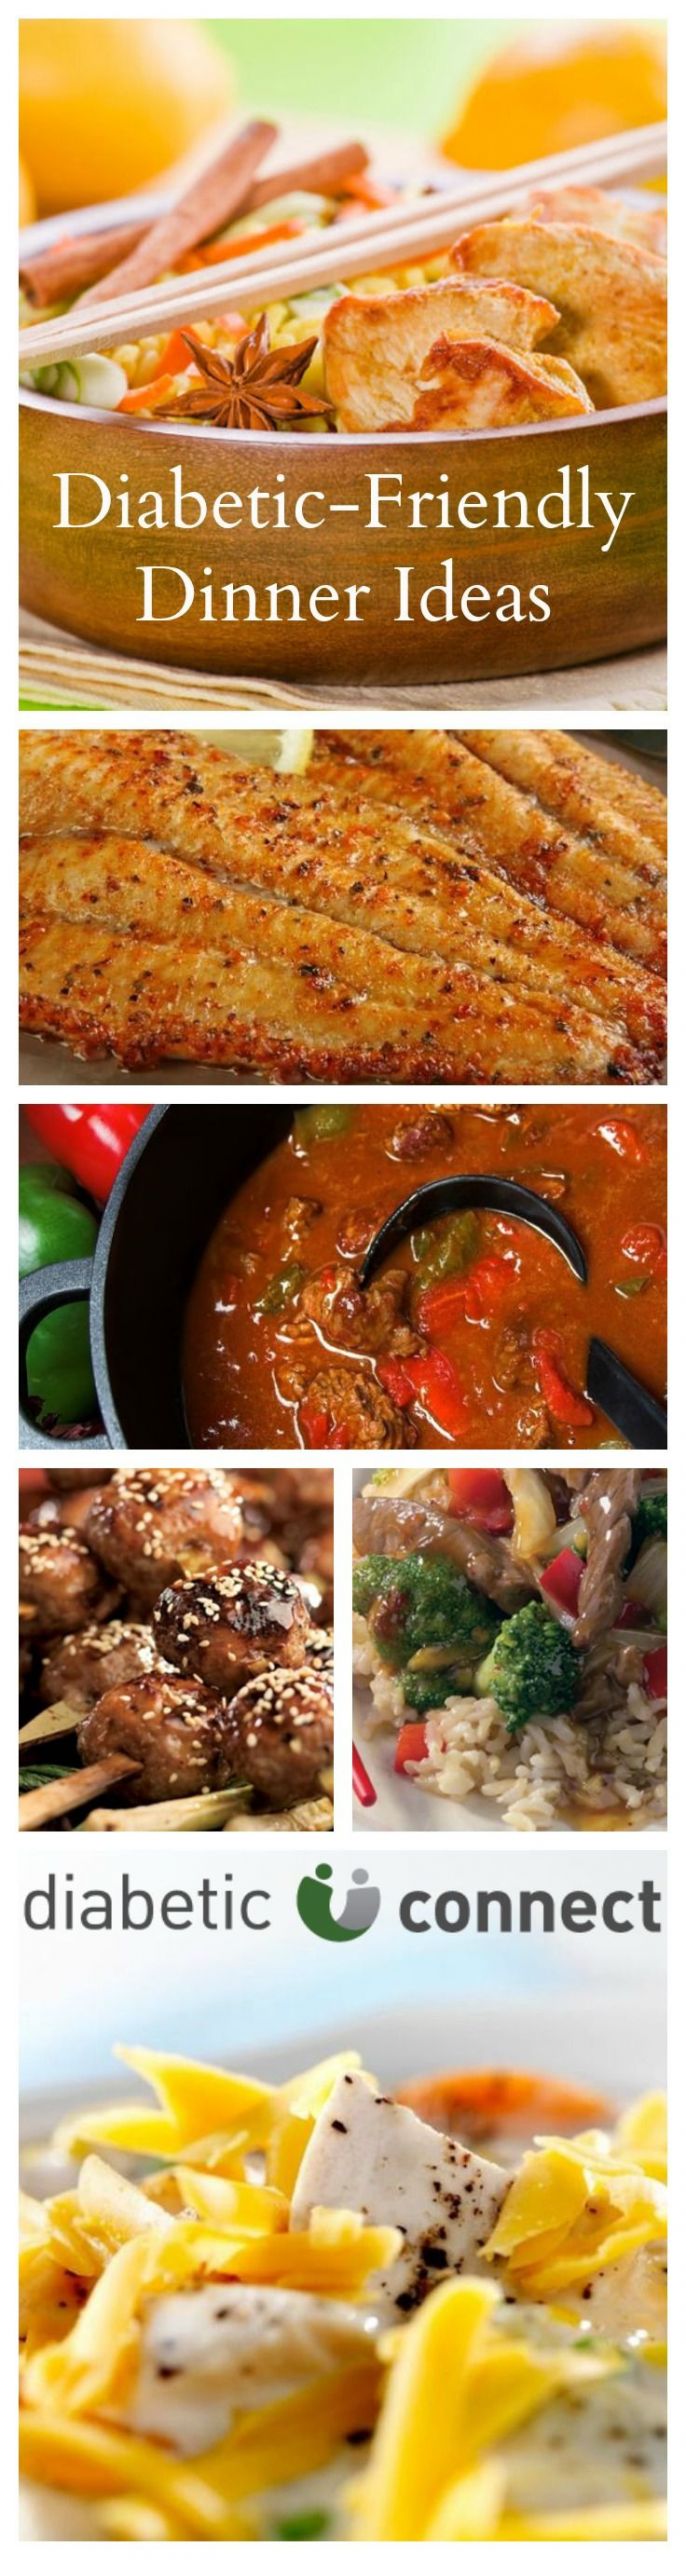 Diabetic Dinner Recipes
 Are you in a dinner rut Here are some new diabetic